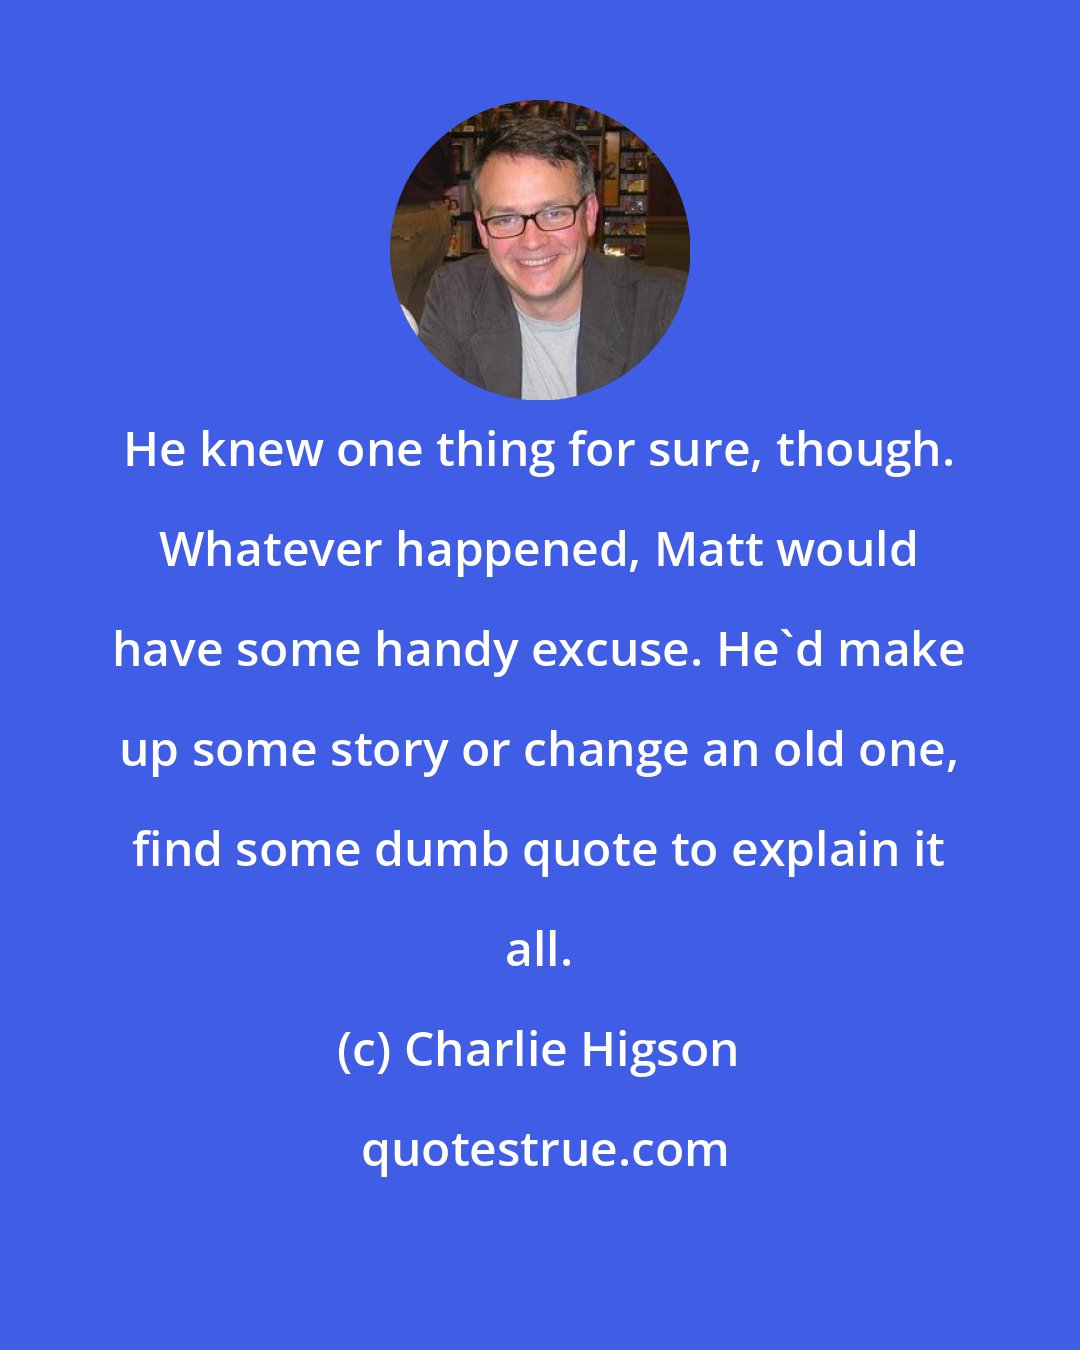 Charlie Higson: He knew one thing for sure, though. Whatever happened, Matt would have some handy excuse. He'd make up some story or change an old one, find some dumb quote to explain it all.